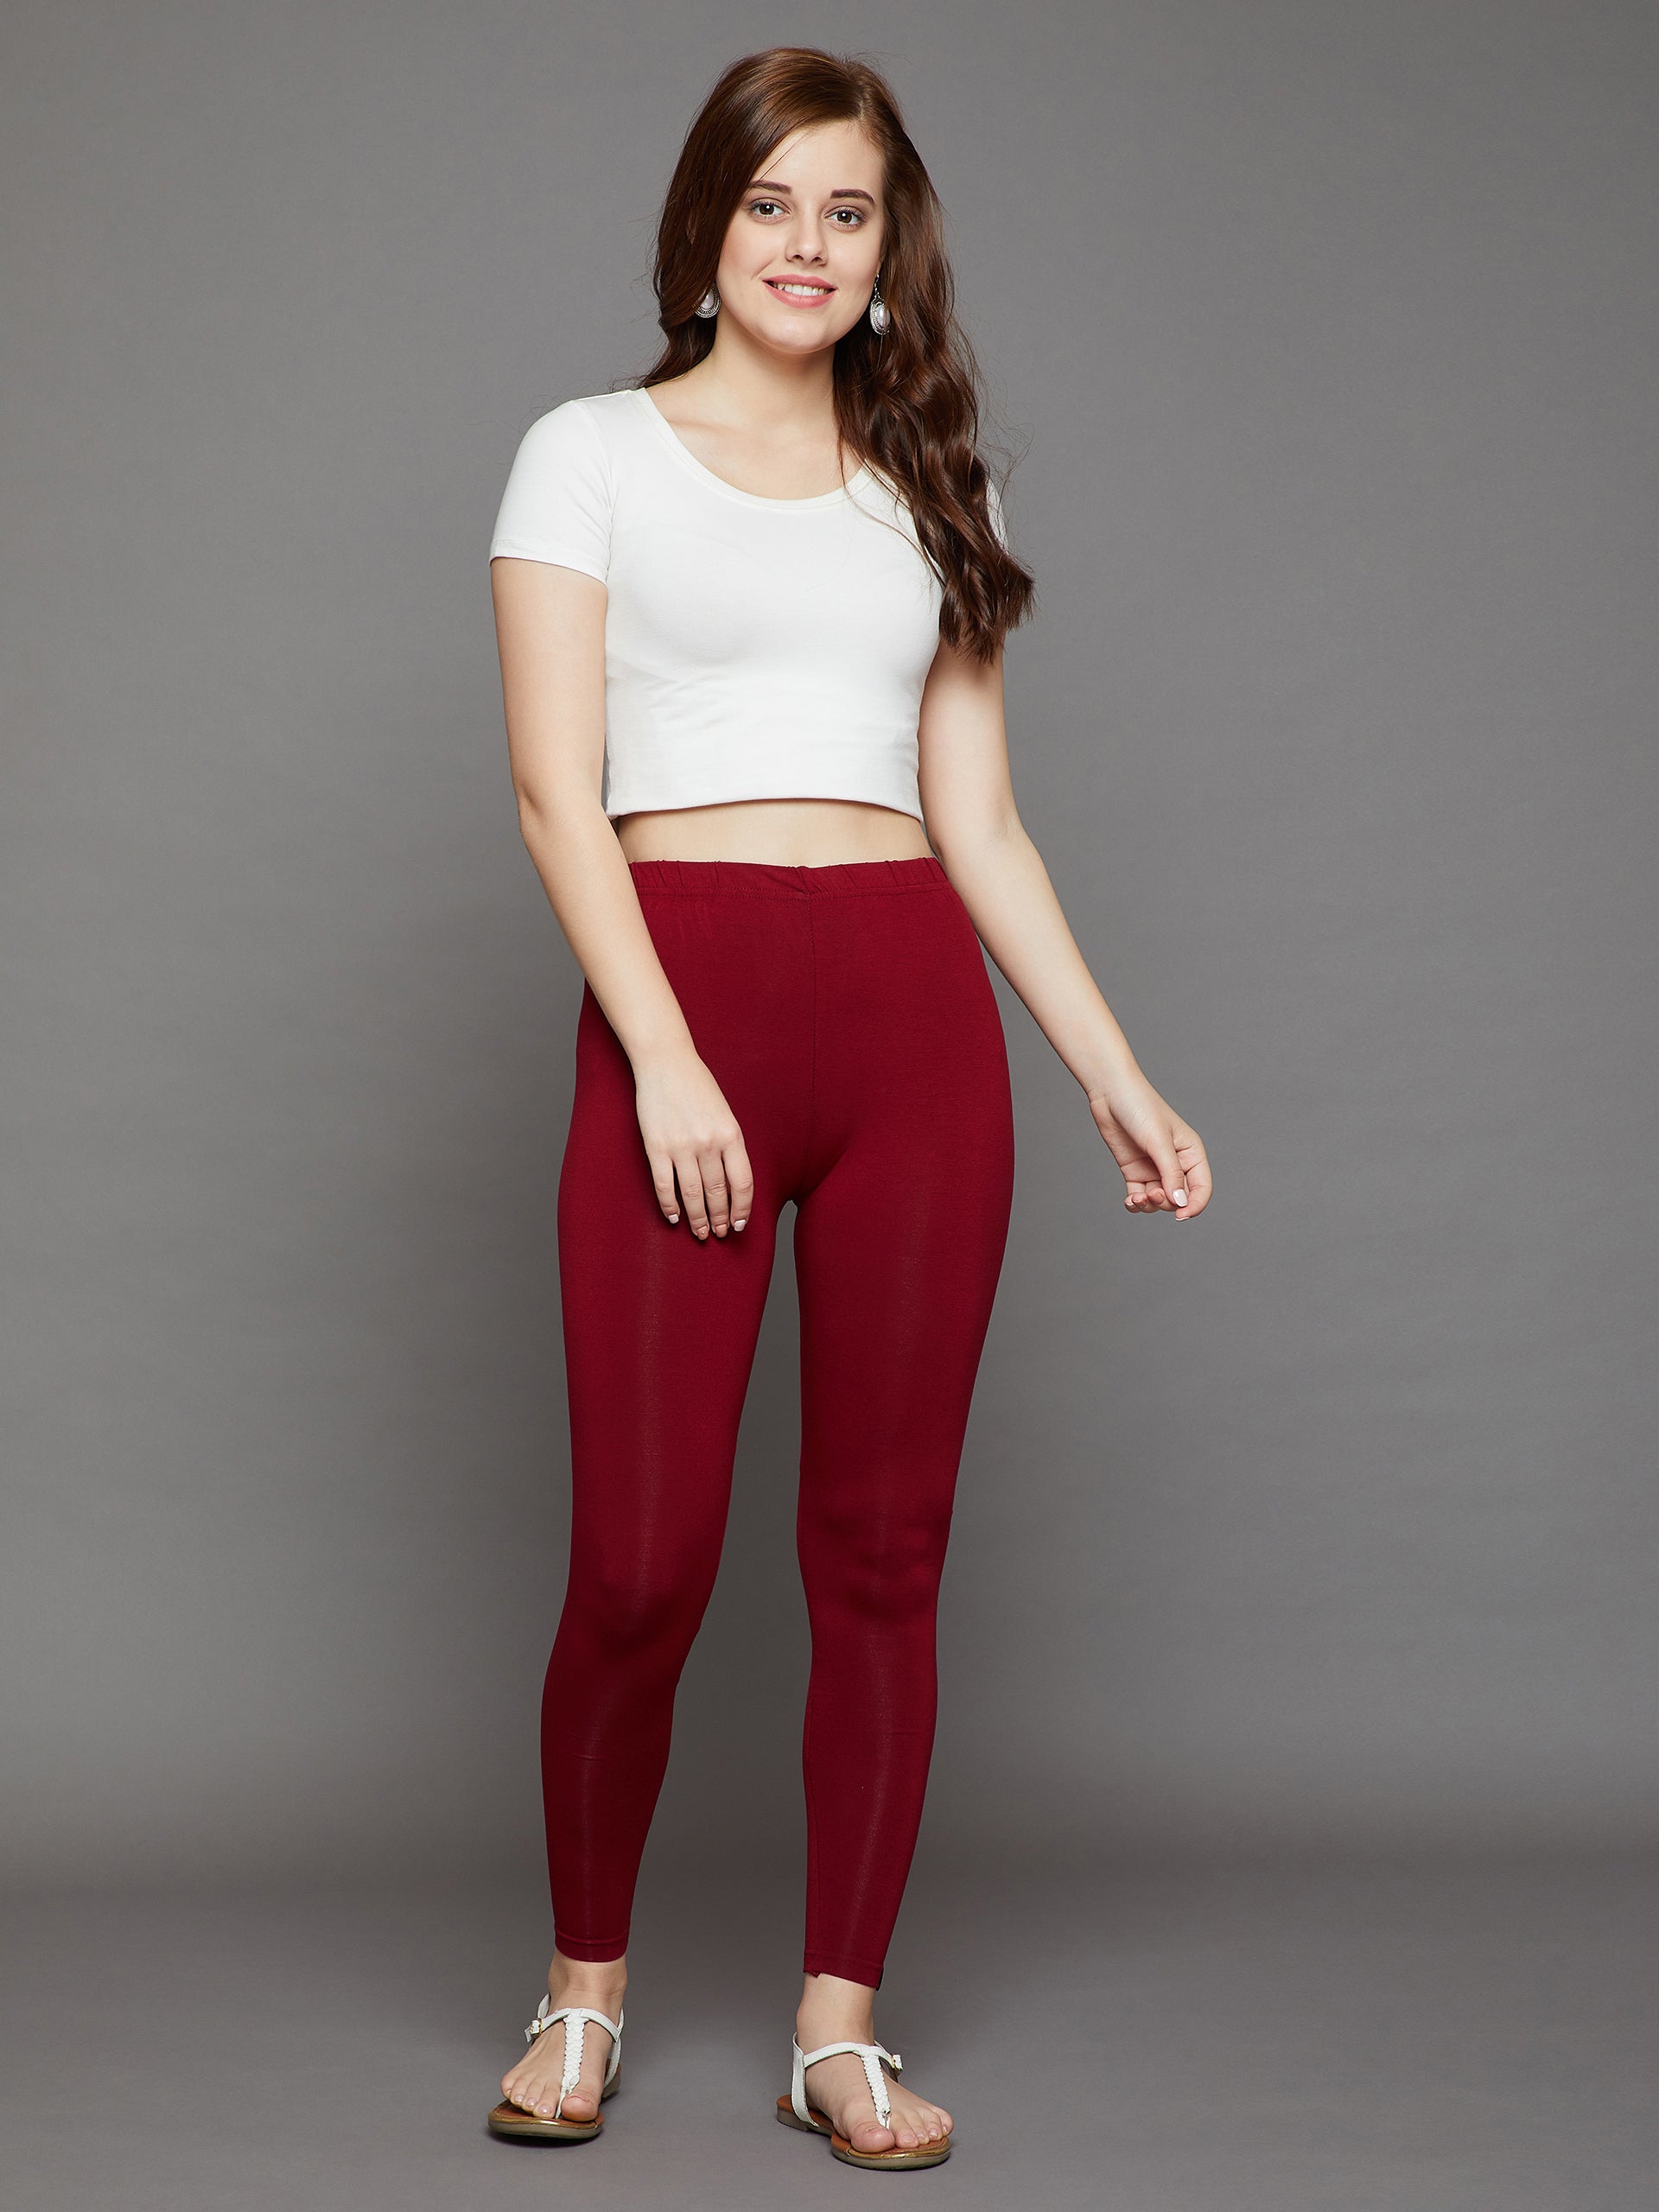 Casual Upto 40 colours Ladies Plain Cotton Legging, Skin Fit at Rs